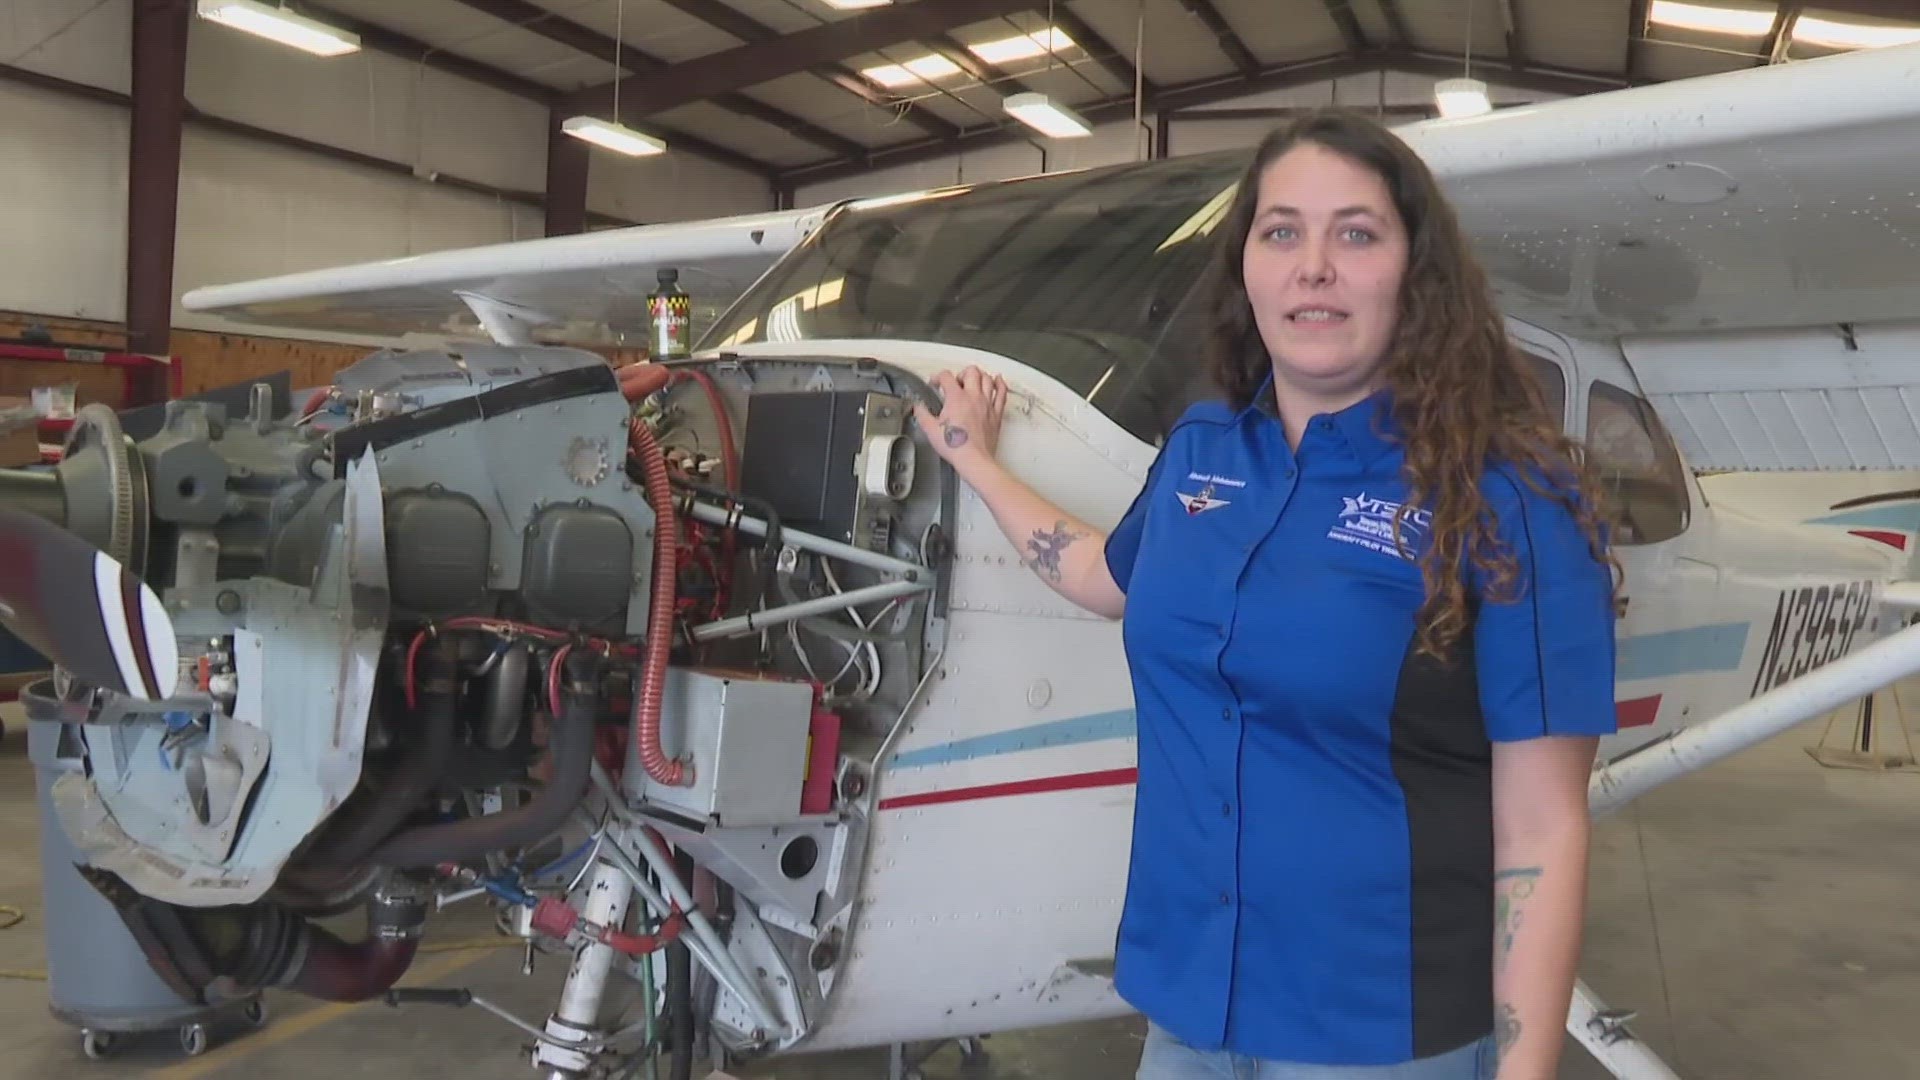 It might be the end of Women's History Month, but the women at Texas State Technical College are sure making a difference in the aviation field year round.